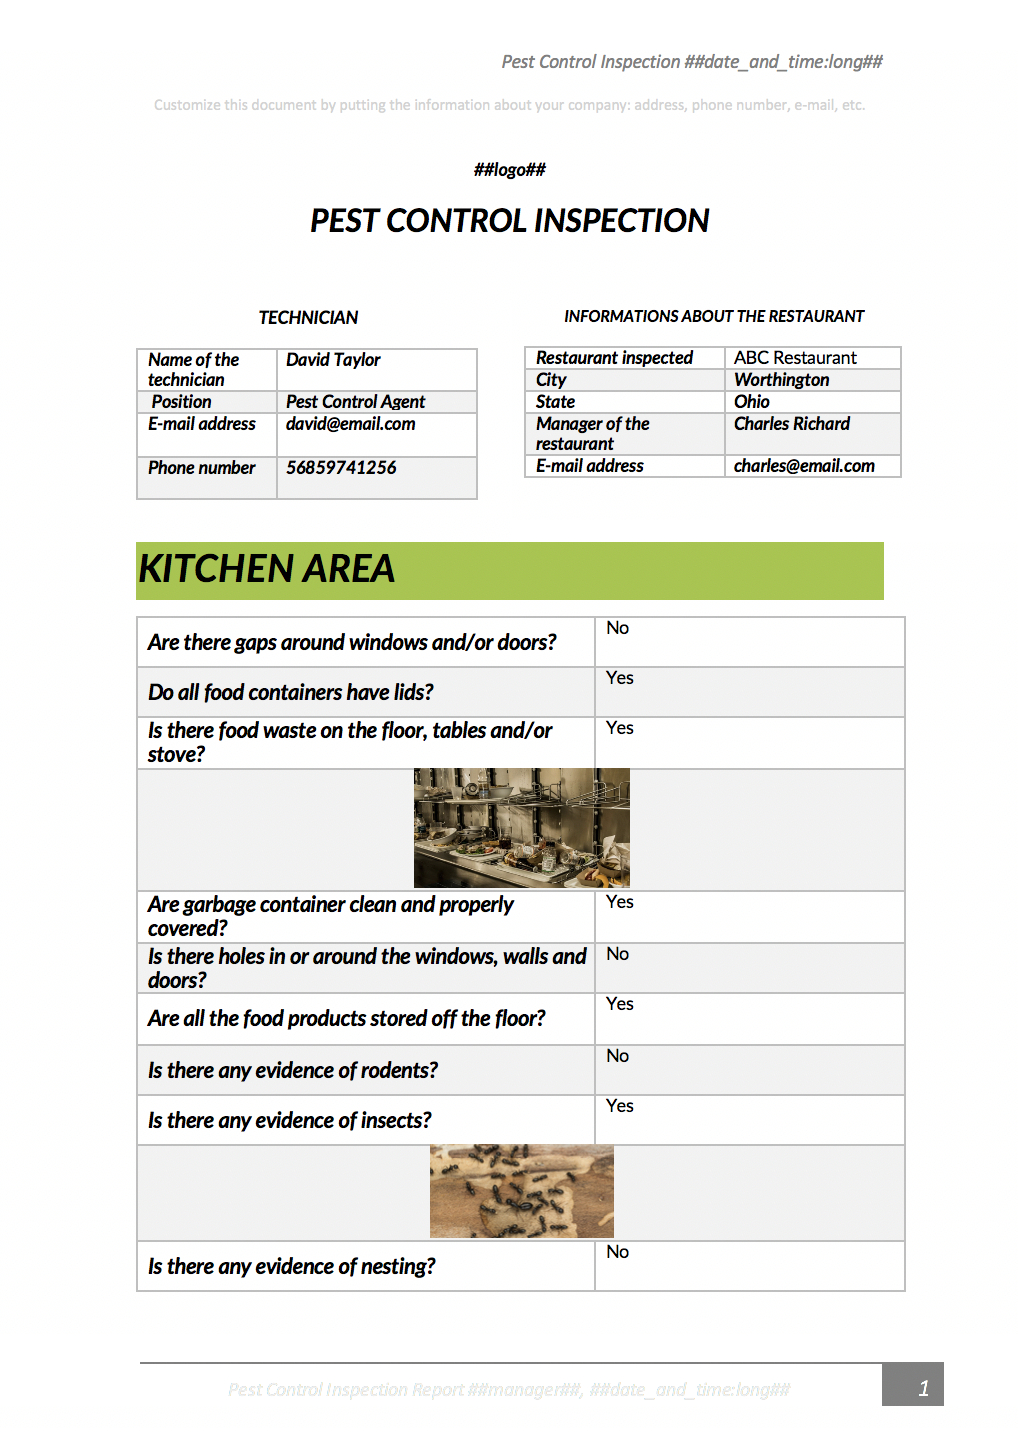 Pest Control Inspection With Kizeo Forms From Your Cellphone In Pest Control Inspection Report Template